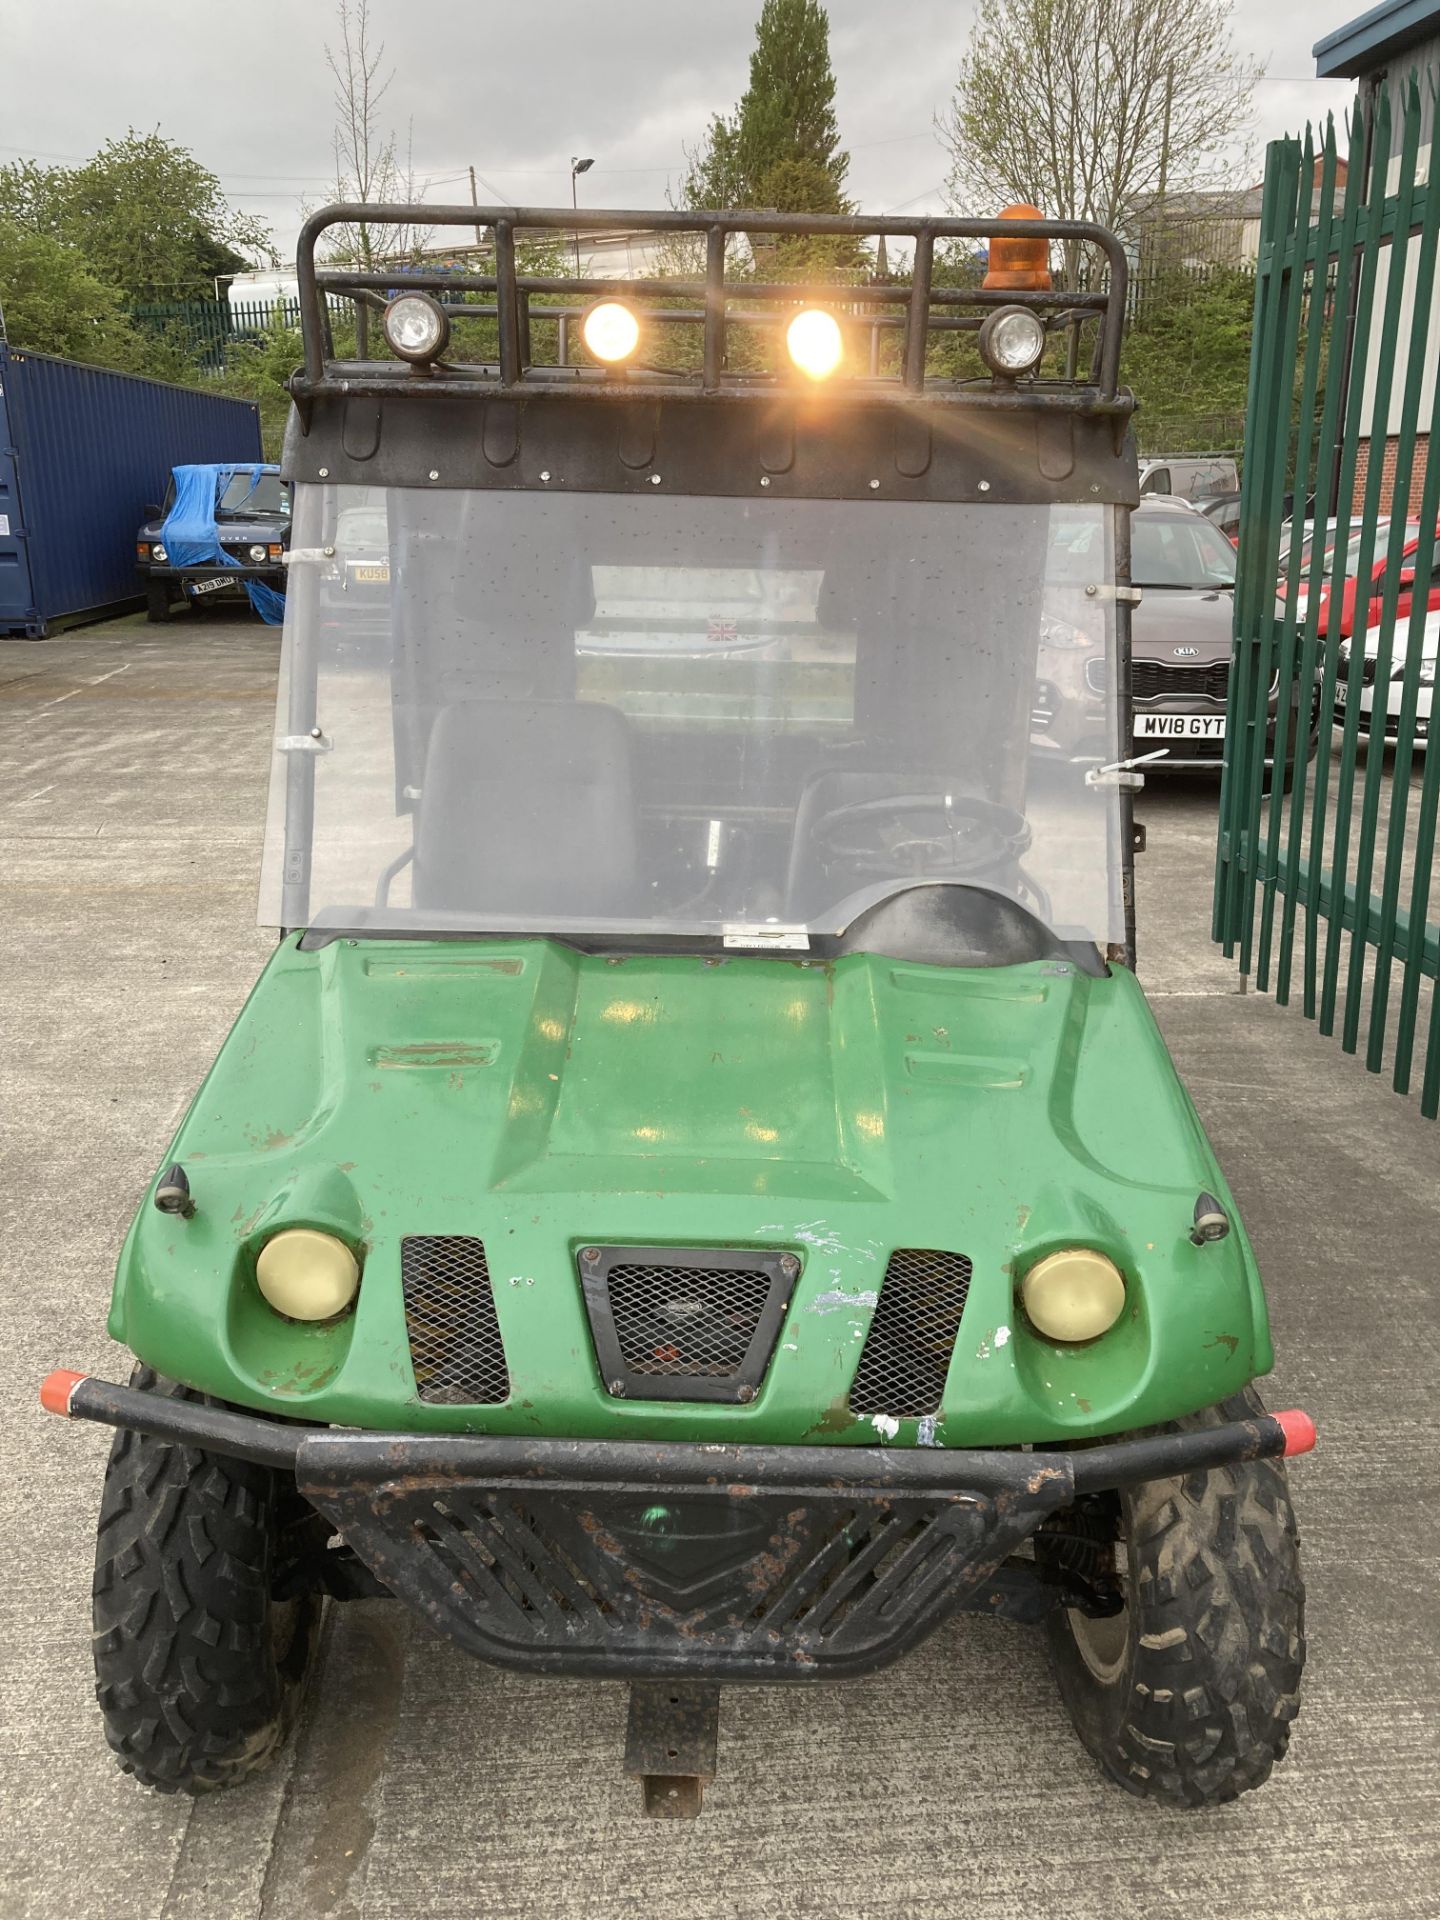 JOYNER JNSZ65OUV 4WD off road vehicle - petrol - green - manual tipper body - complete with manual. - Image 2 of 15